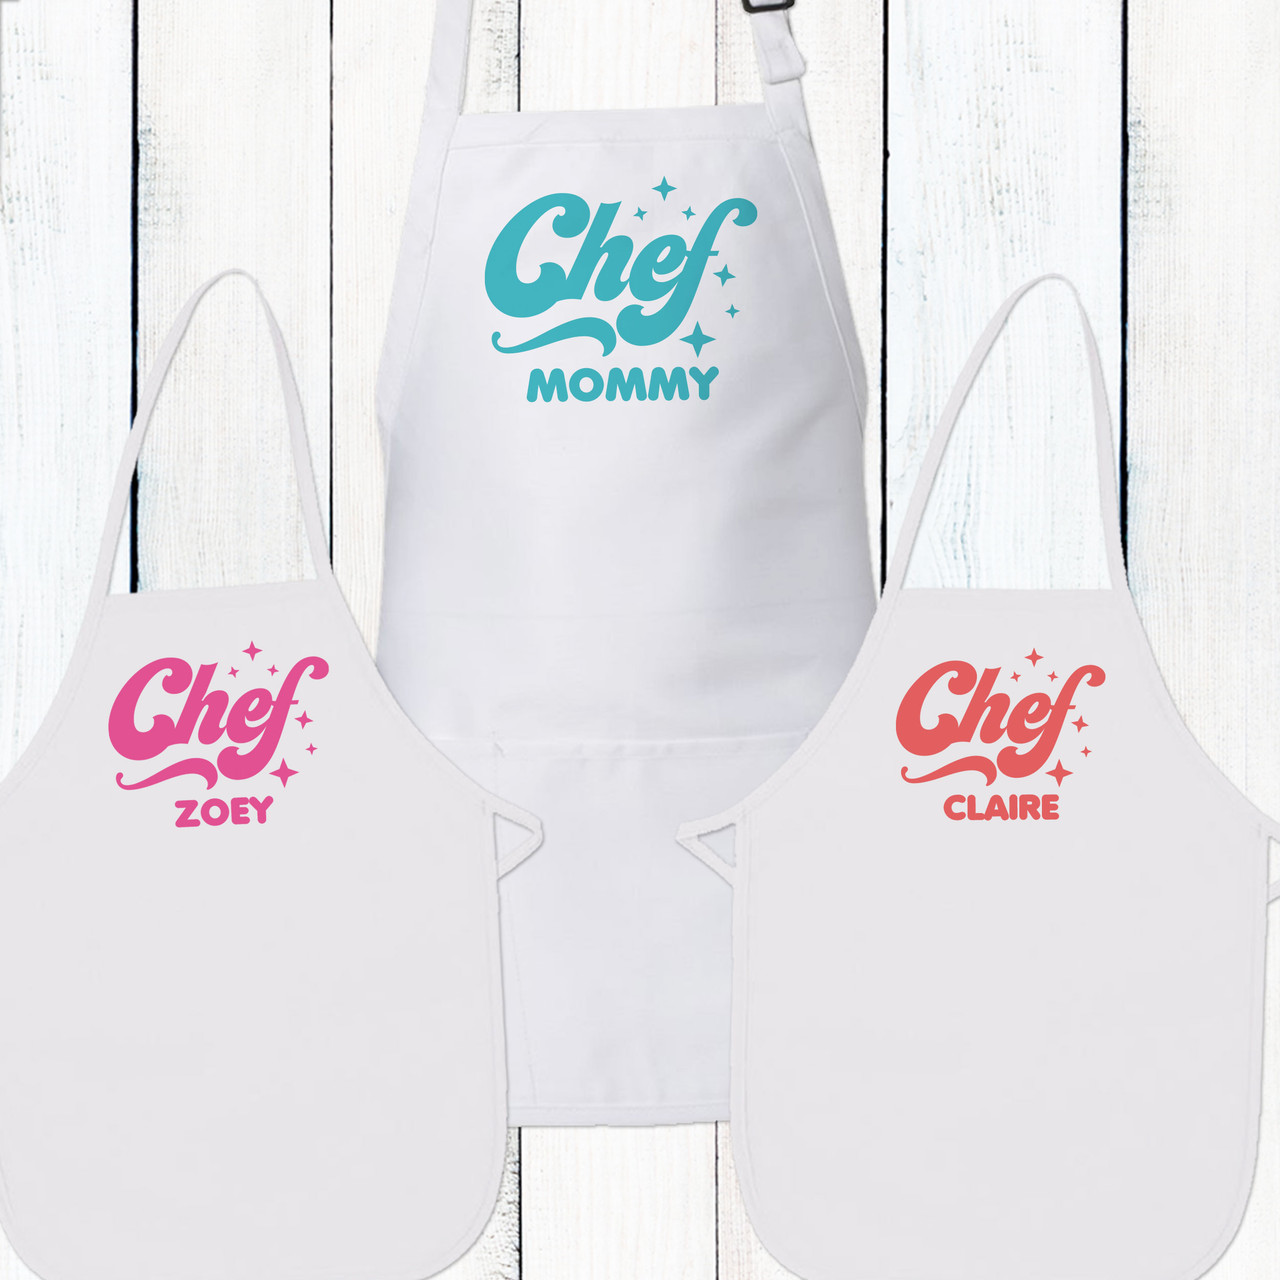 https://cdn11.bigcommerce.com/s-5grzuu6/images/stencil/1280x1280/products/5940/44097/Retro-Chef_Personalized_Adult_and_Childrens_Apron_Set__99558.1681854837.jpg?c=2